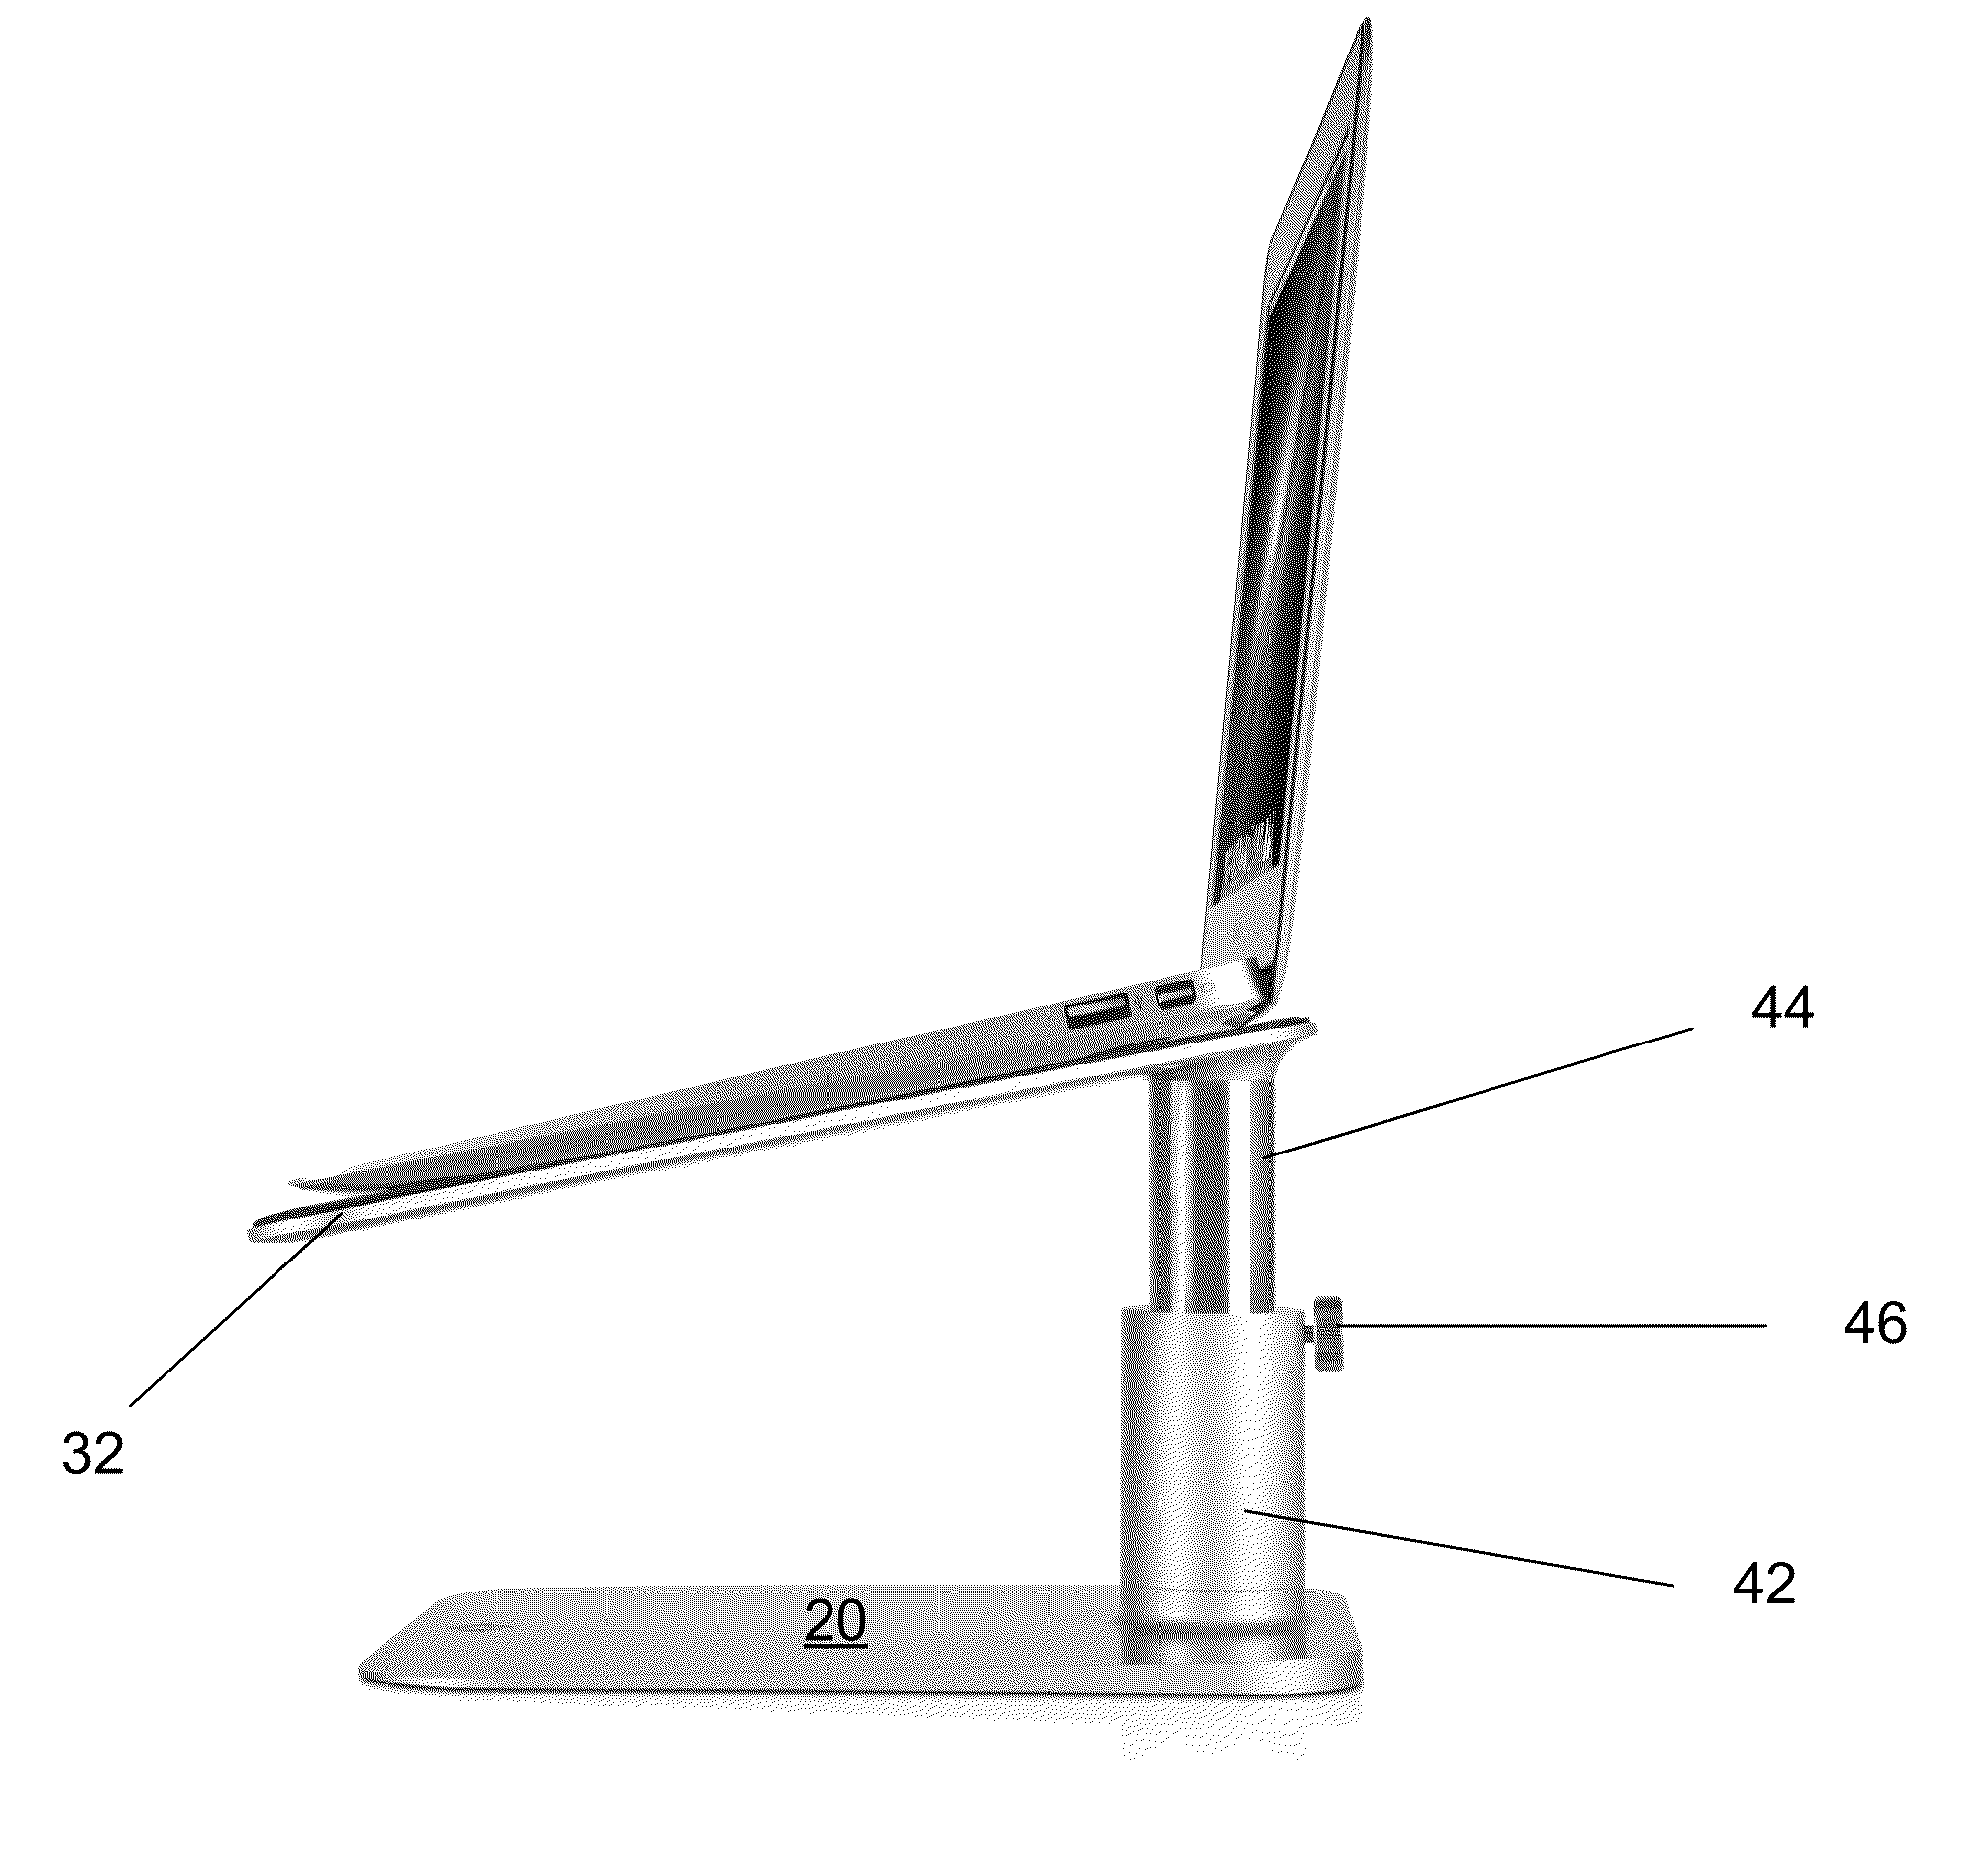 Adjustable stand for computing device